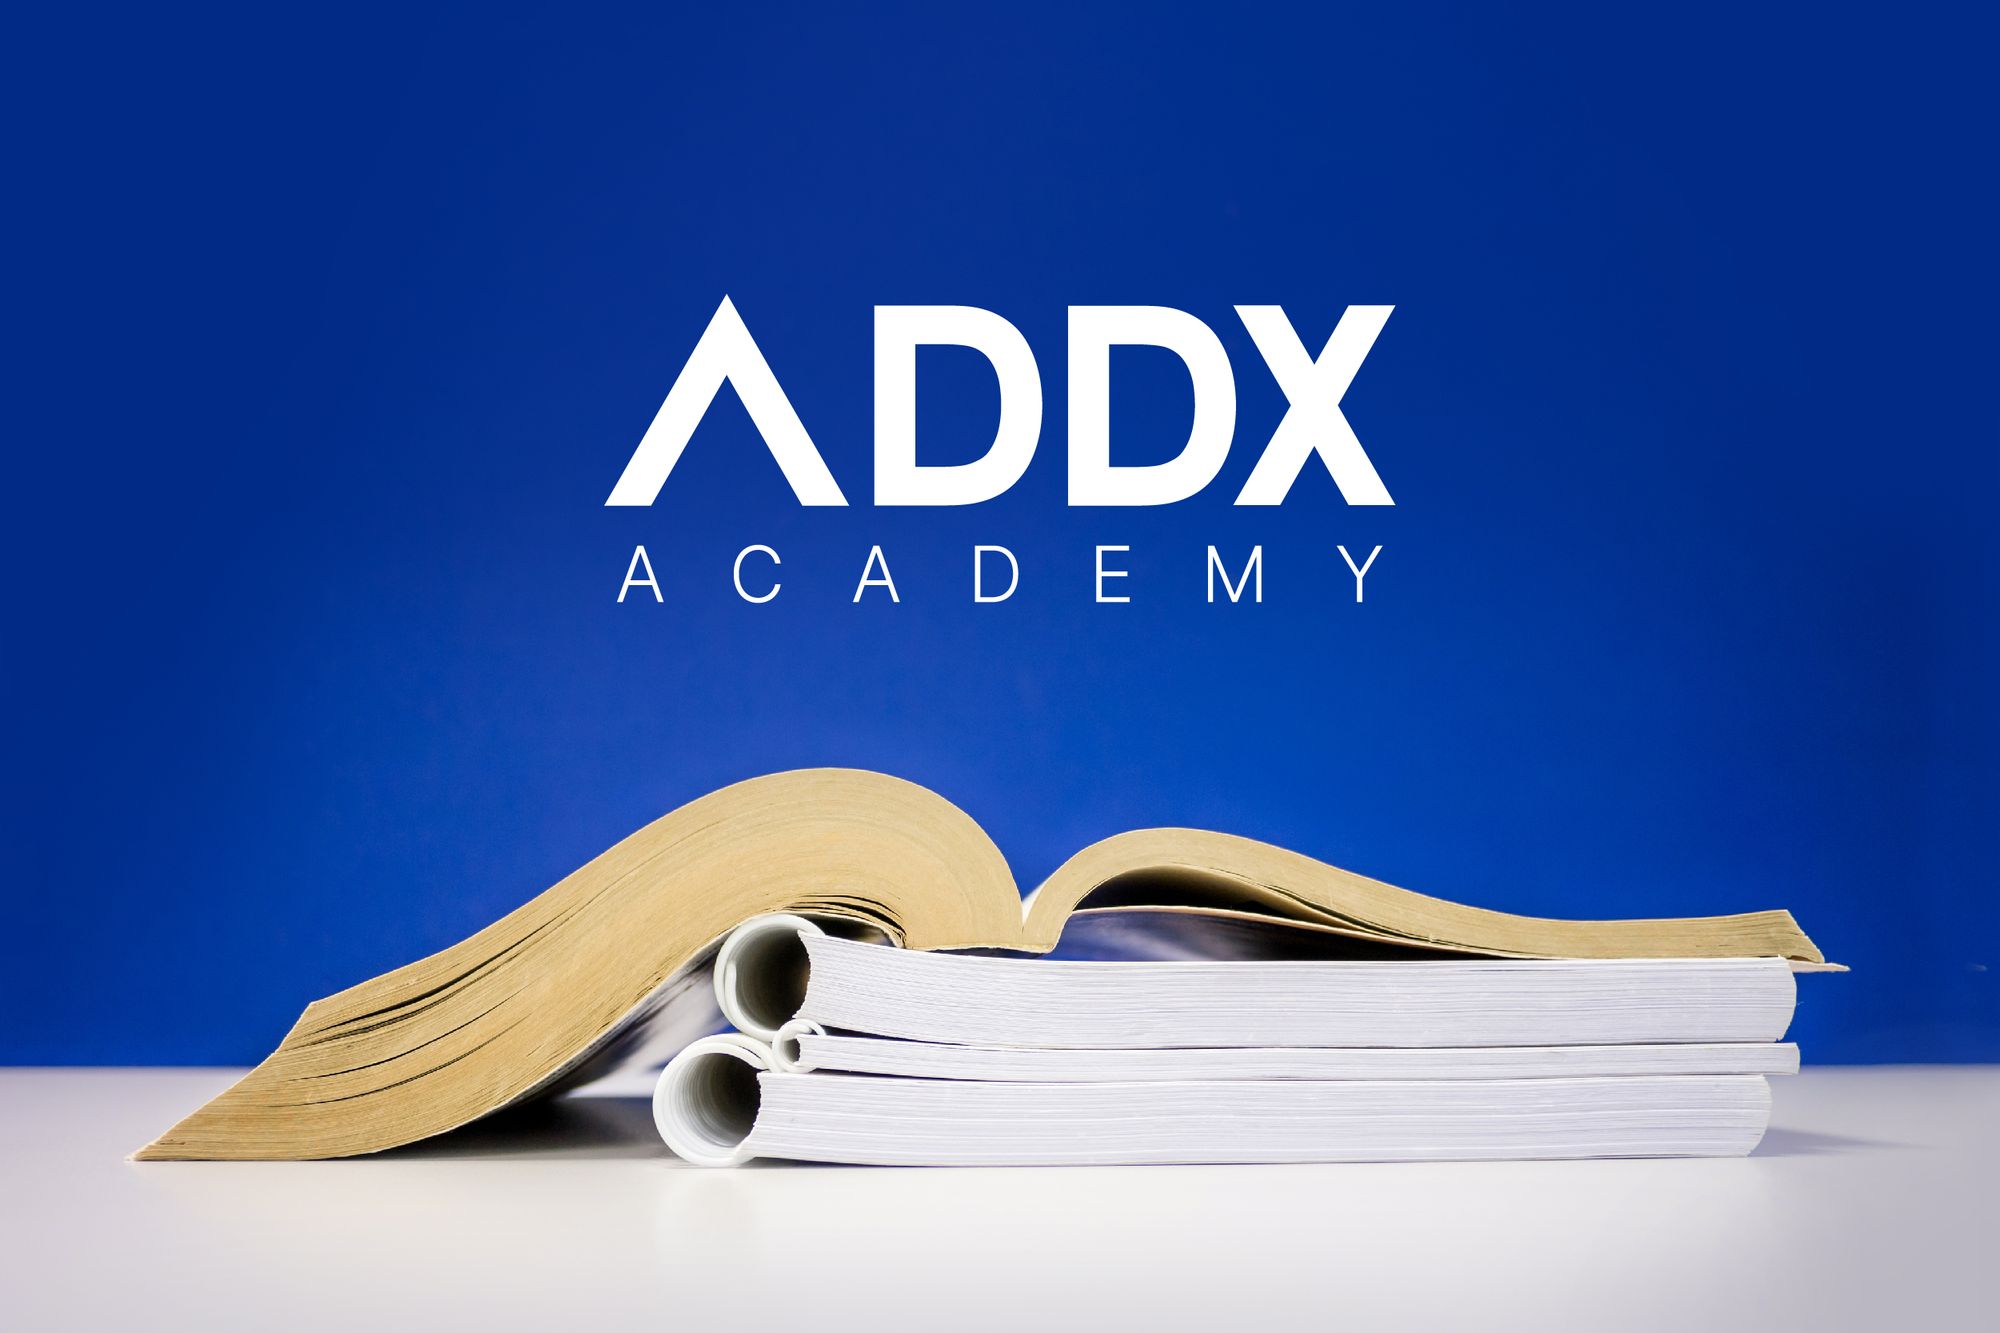 ADDX Academy: What Are Hedge Funds?